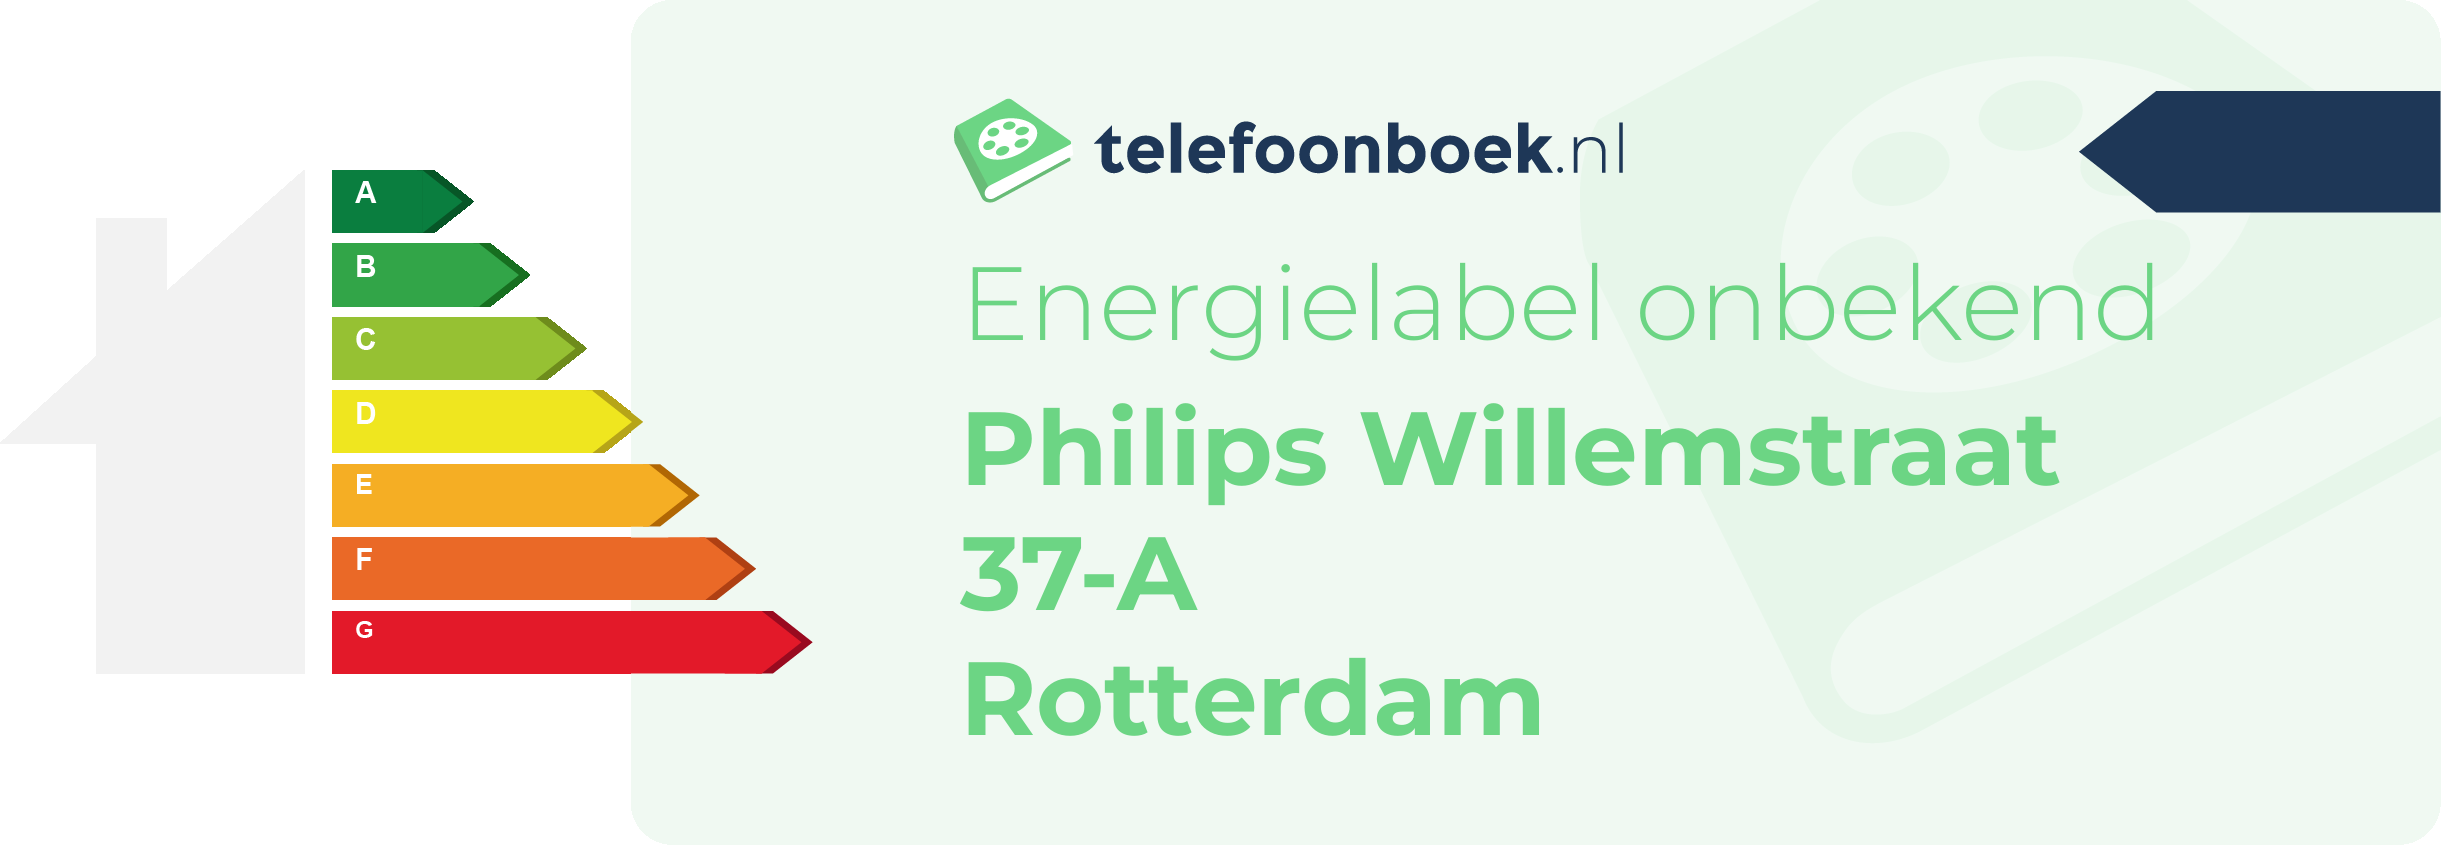 Energielabel Philips Willemstraat 37-A Rotterdam